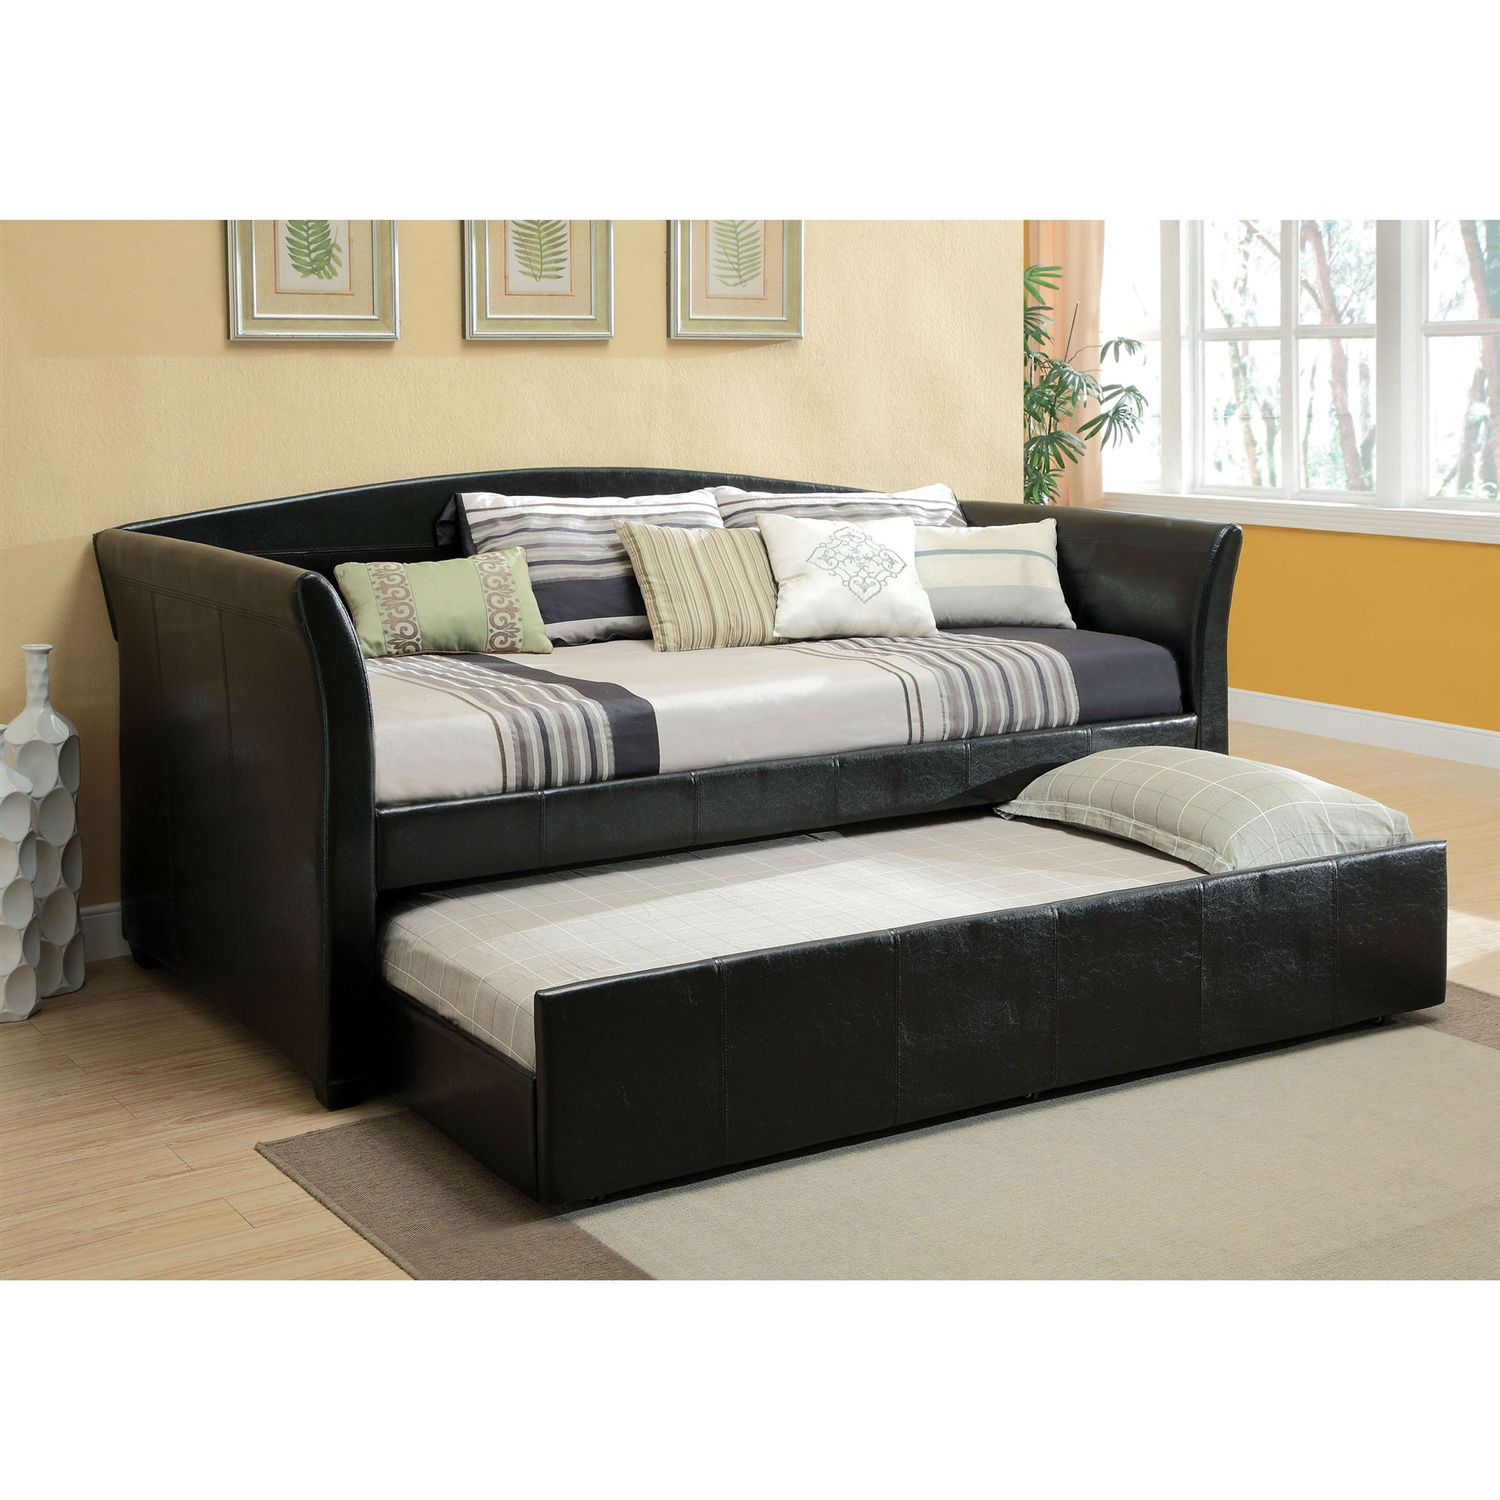 Brand new Twin day bed with trundle